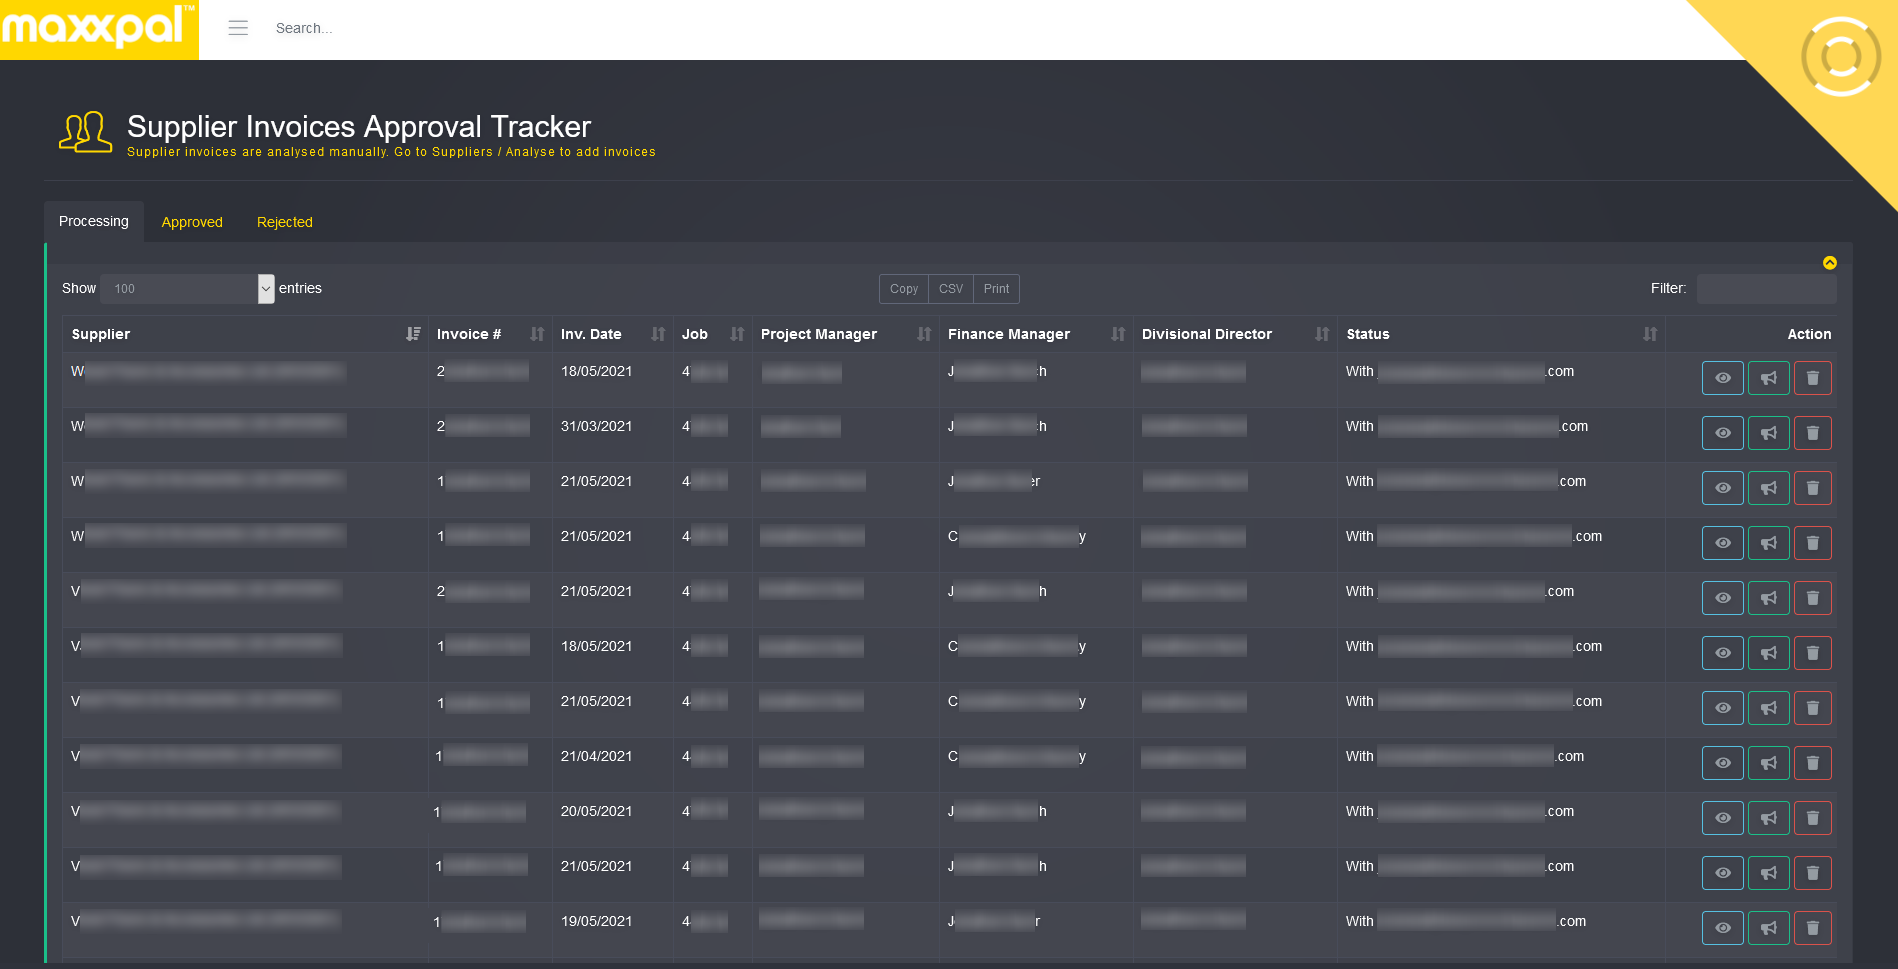 An image of the Supplier Invoice Approval Workflow Dashboard